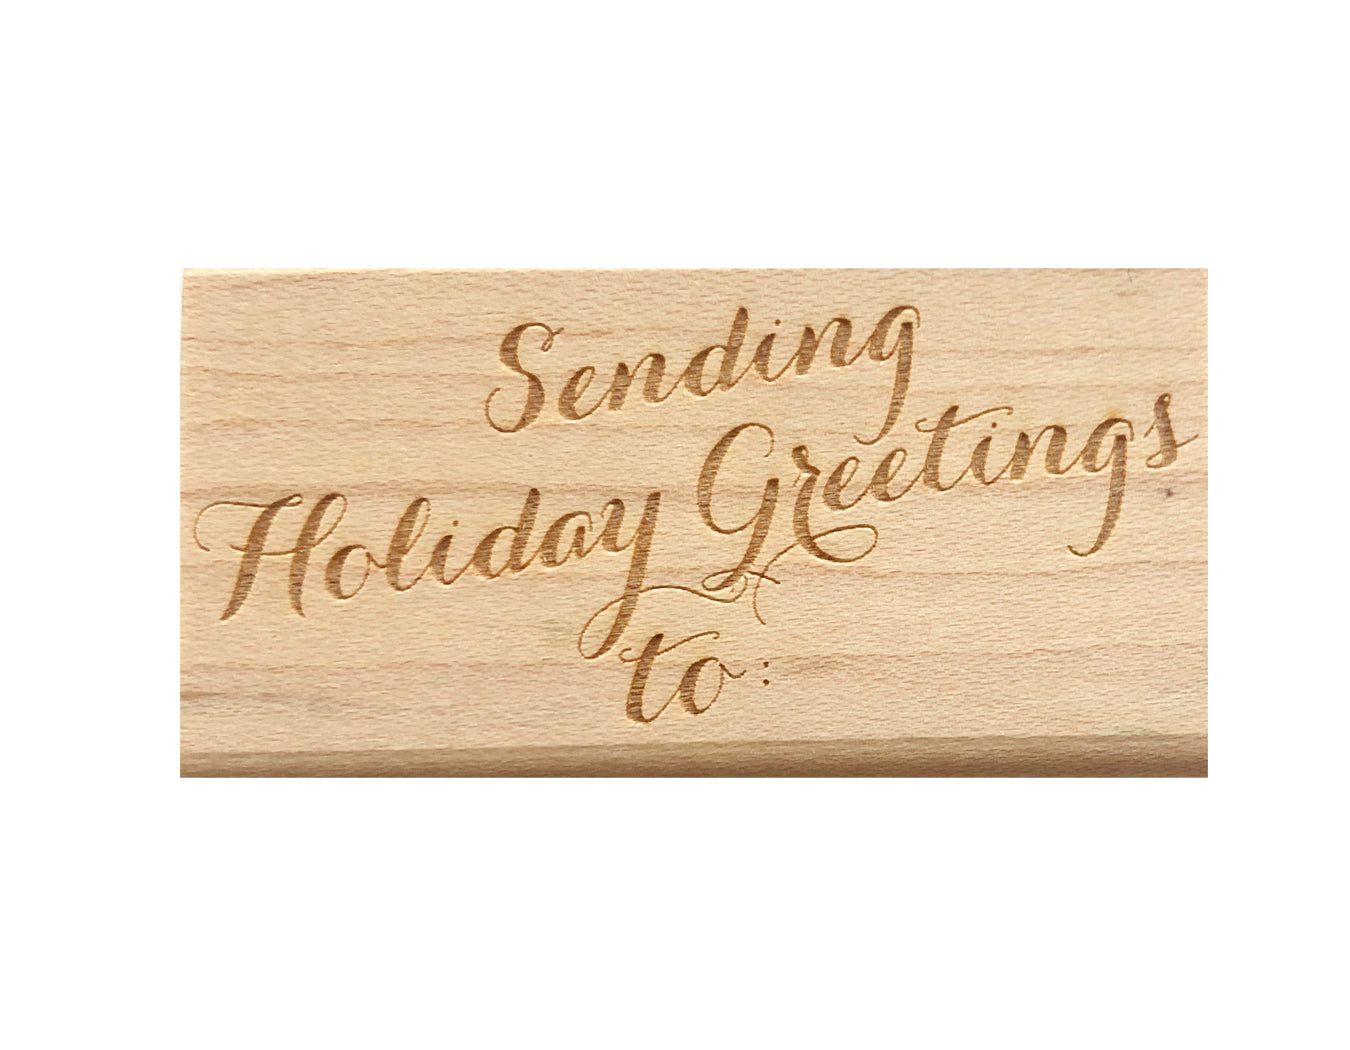 Sending holiday greetings to Rubber Stamp